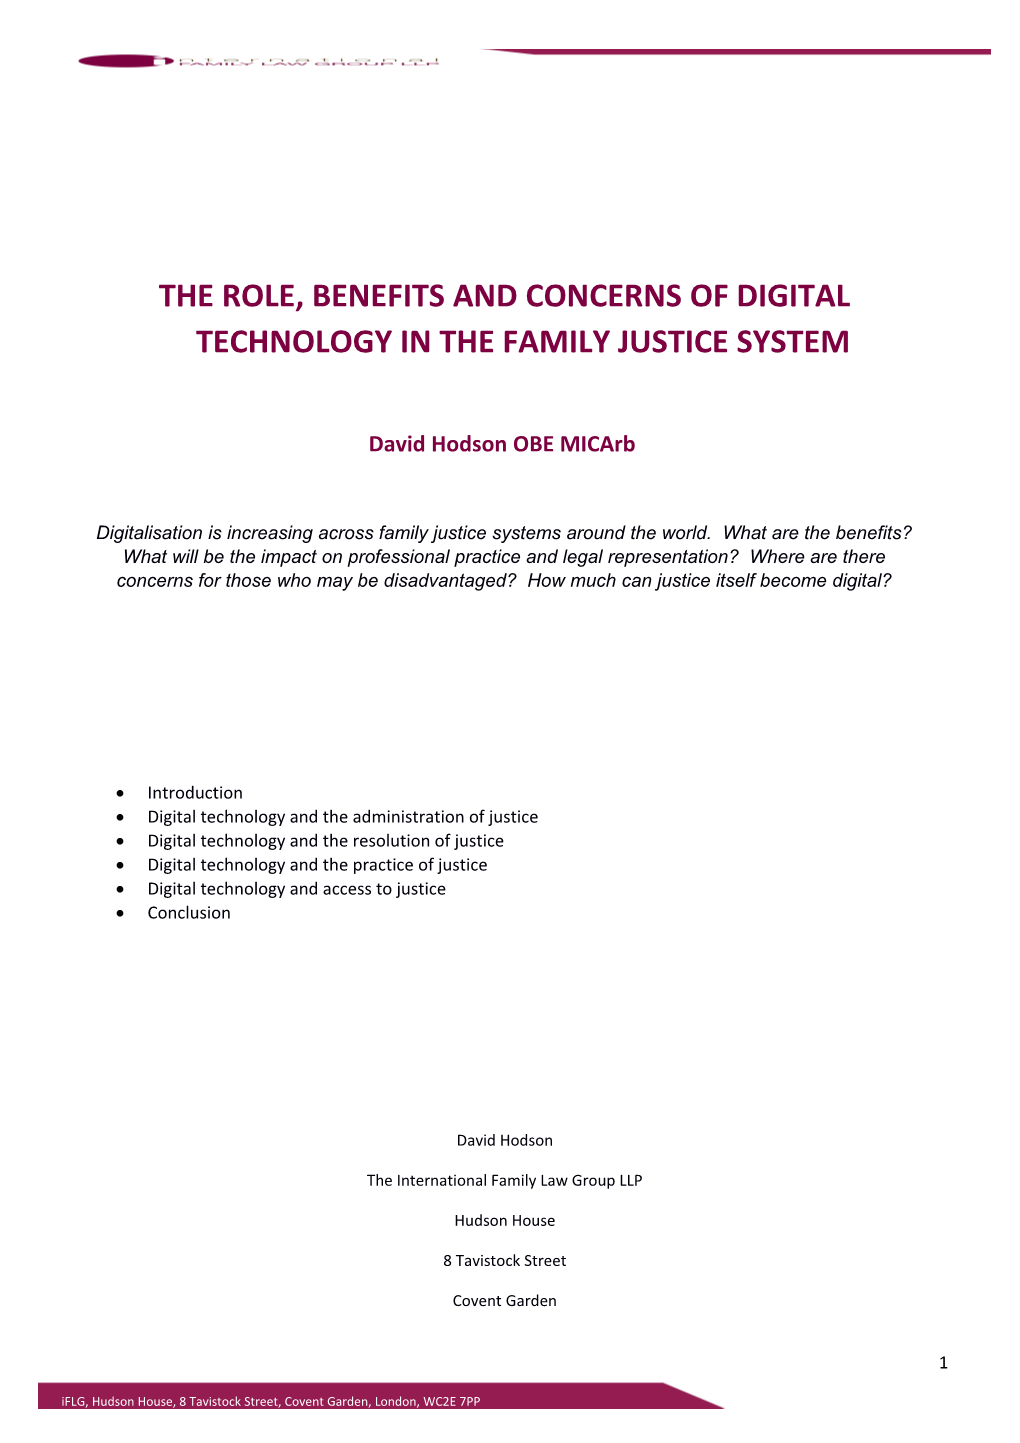 The Role, Benefits and Concerns of Digital Technology in the Family Justice System